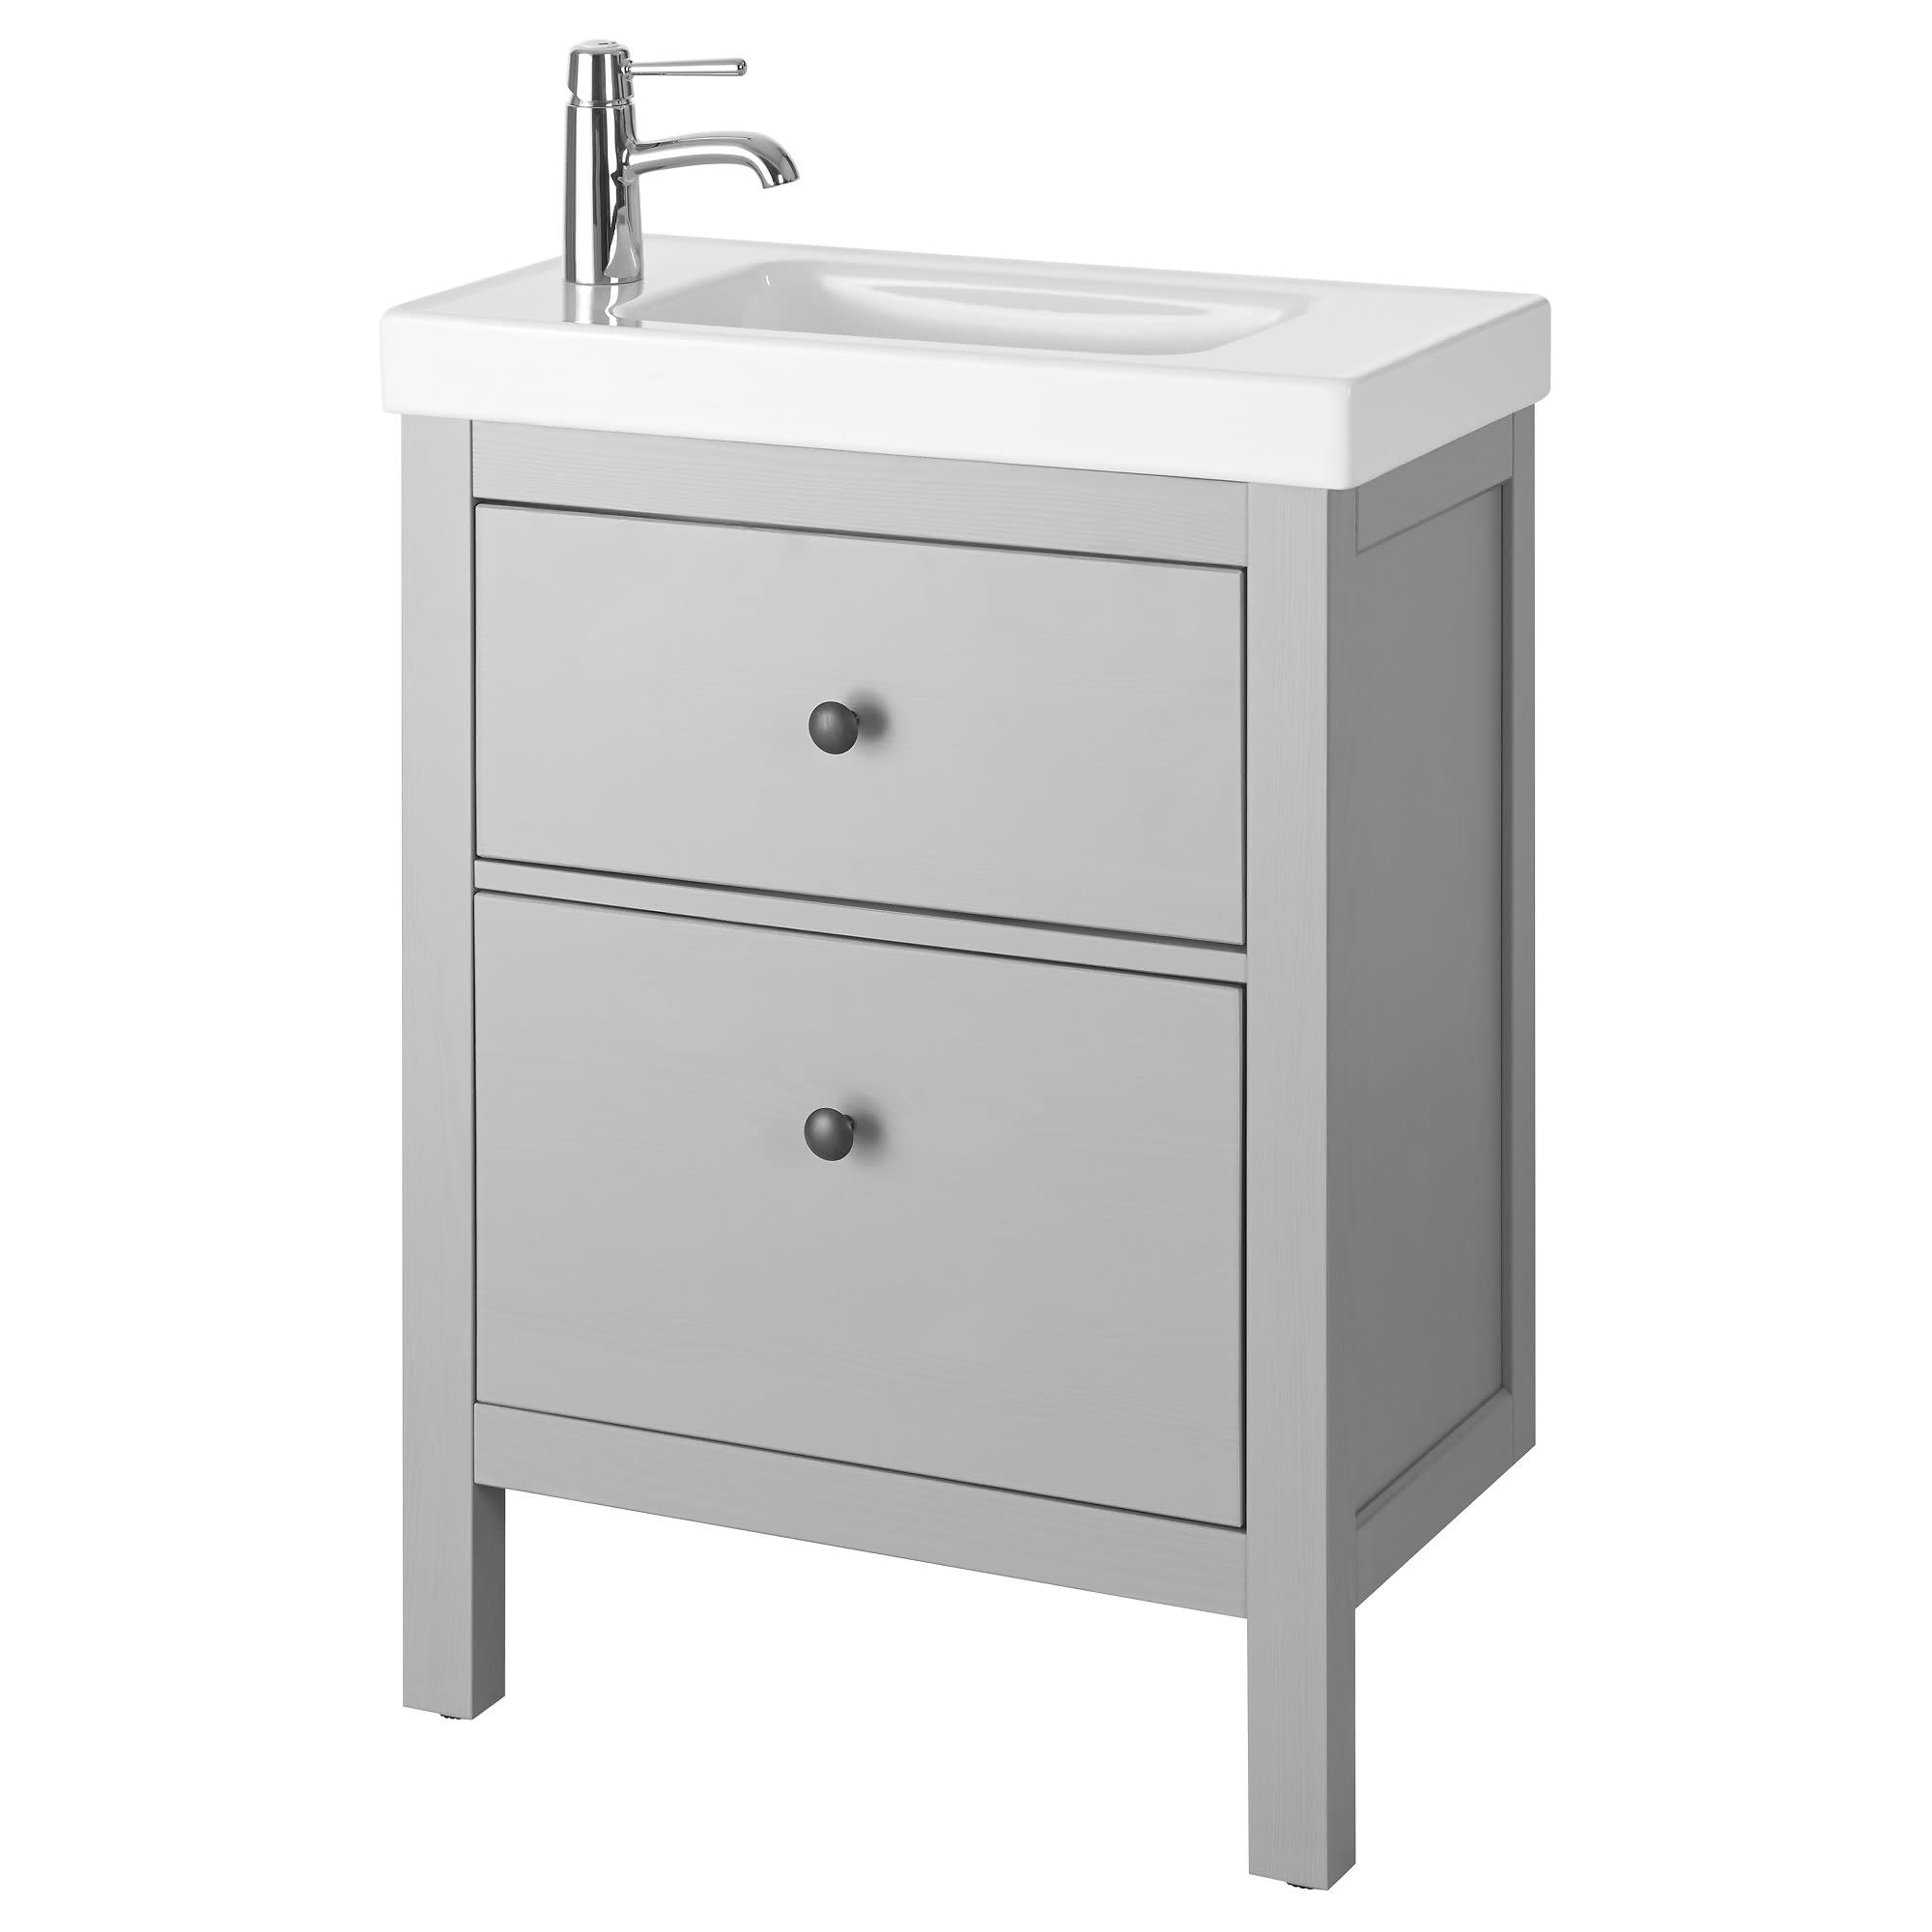 Small Space Bathroom Vanity And Sink - Best Design Idea